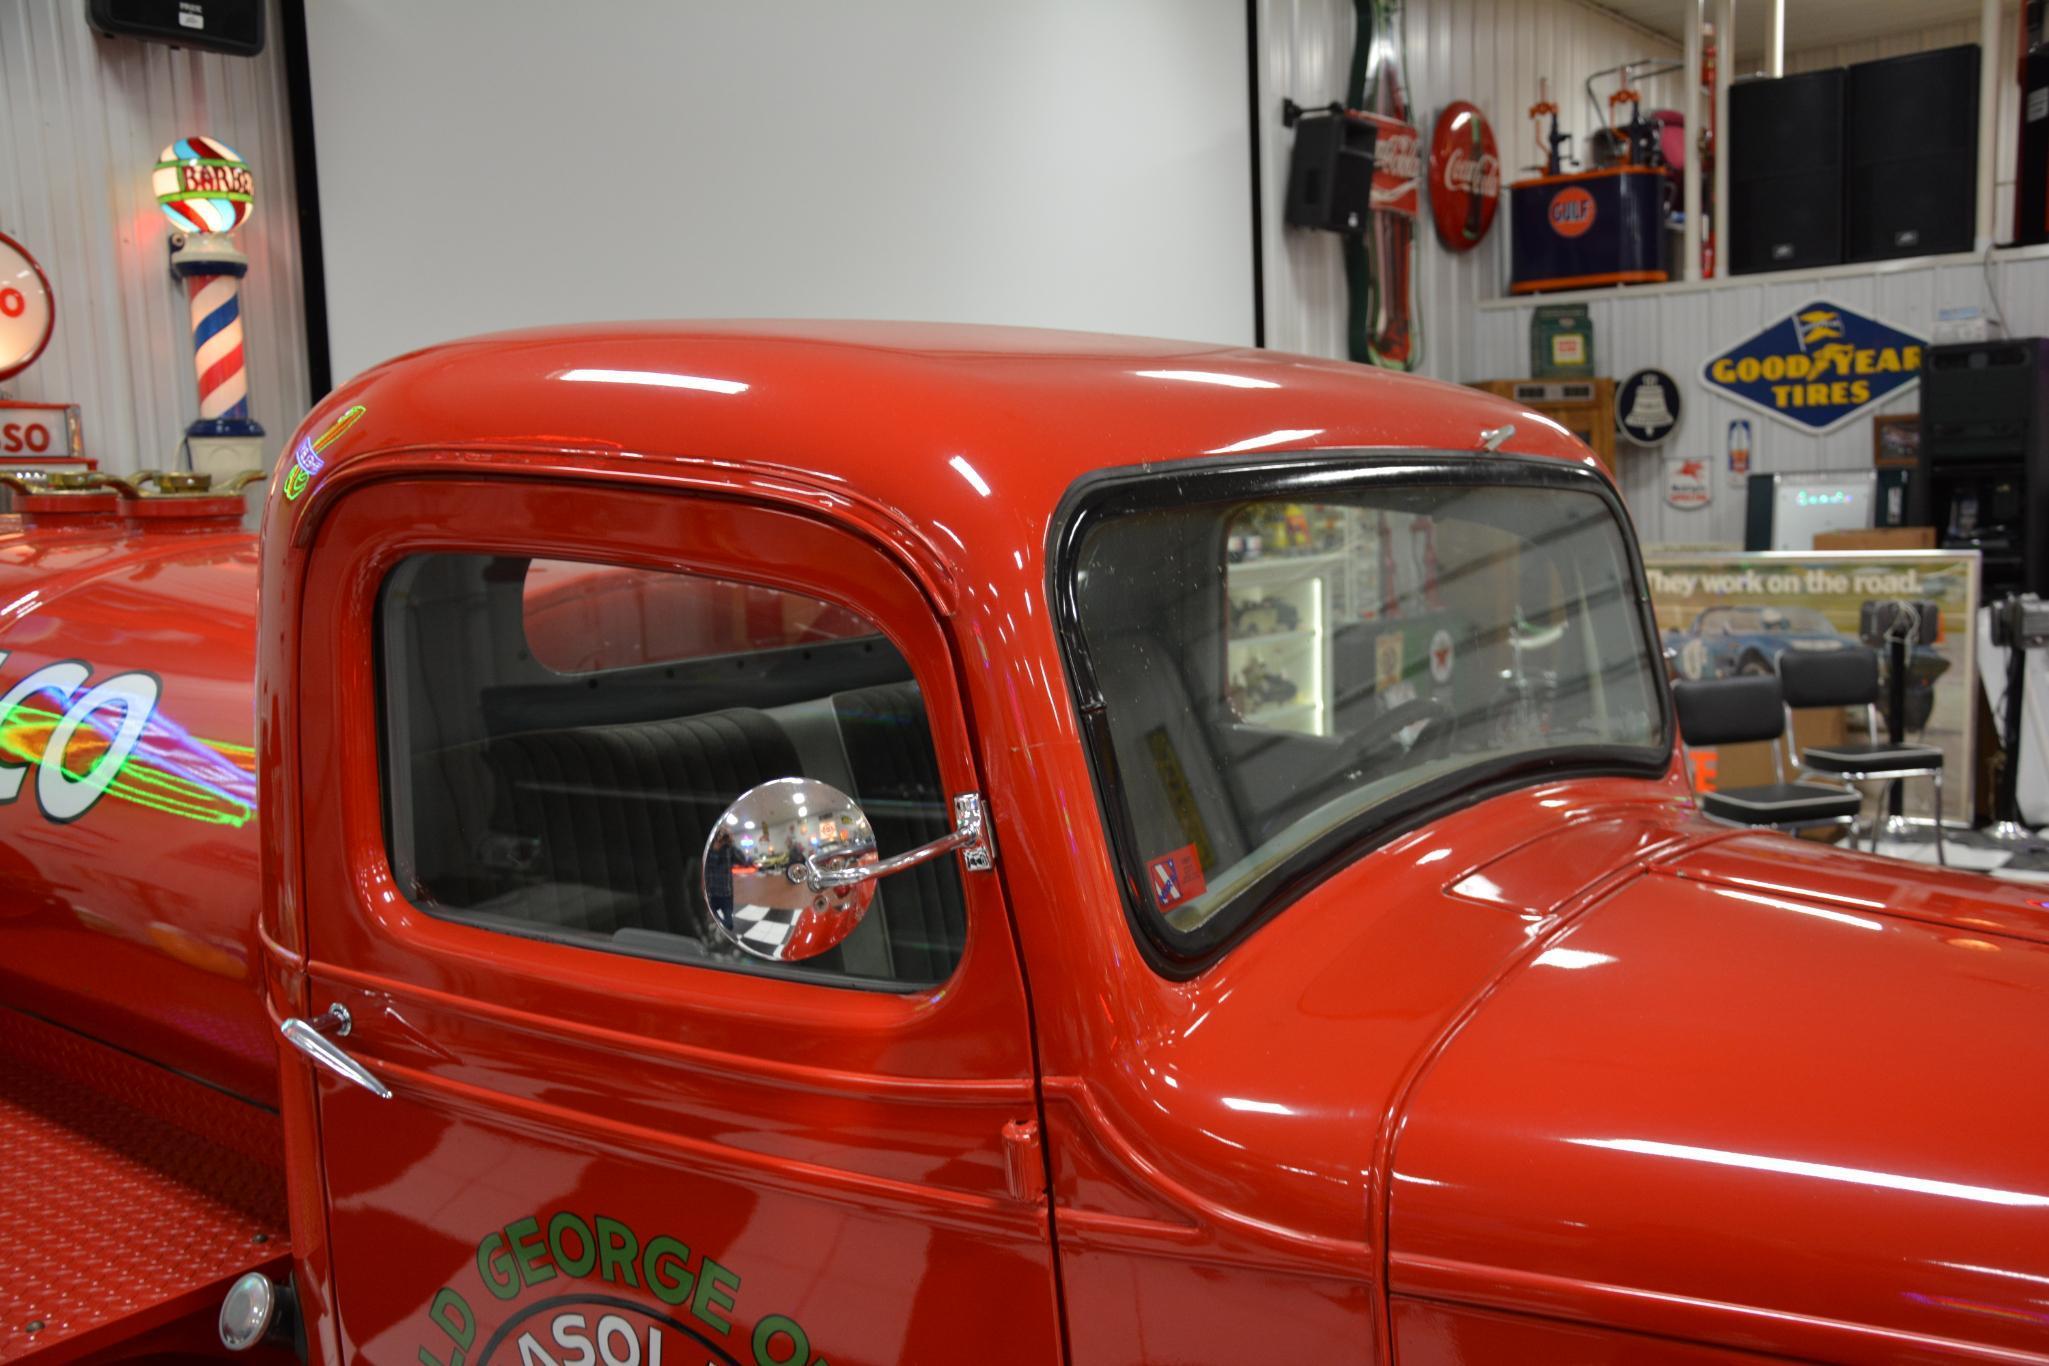 1938 Chevrolet fuel delivery truck